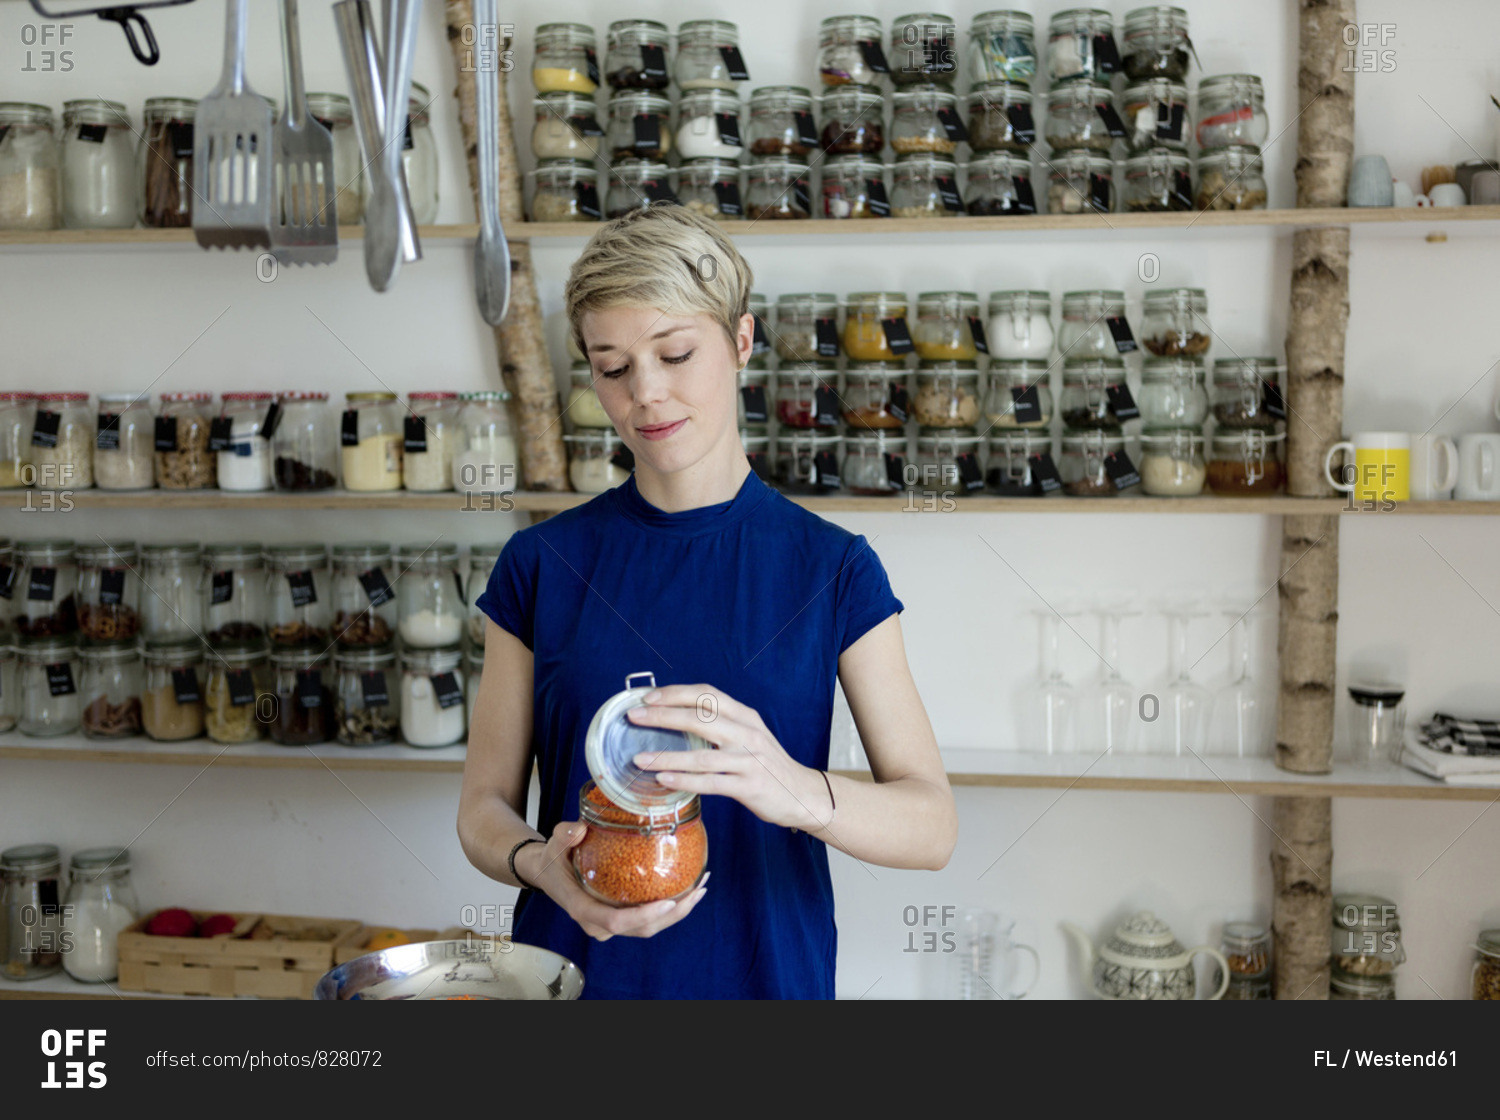 Woman opening jar in front of spice shelf in kitchen